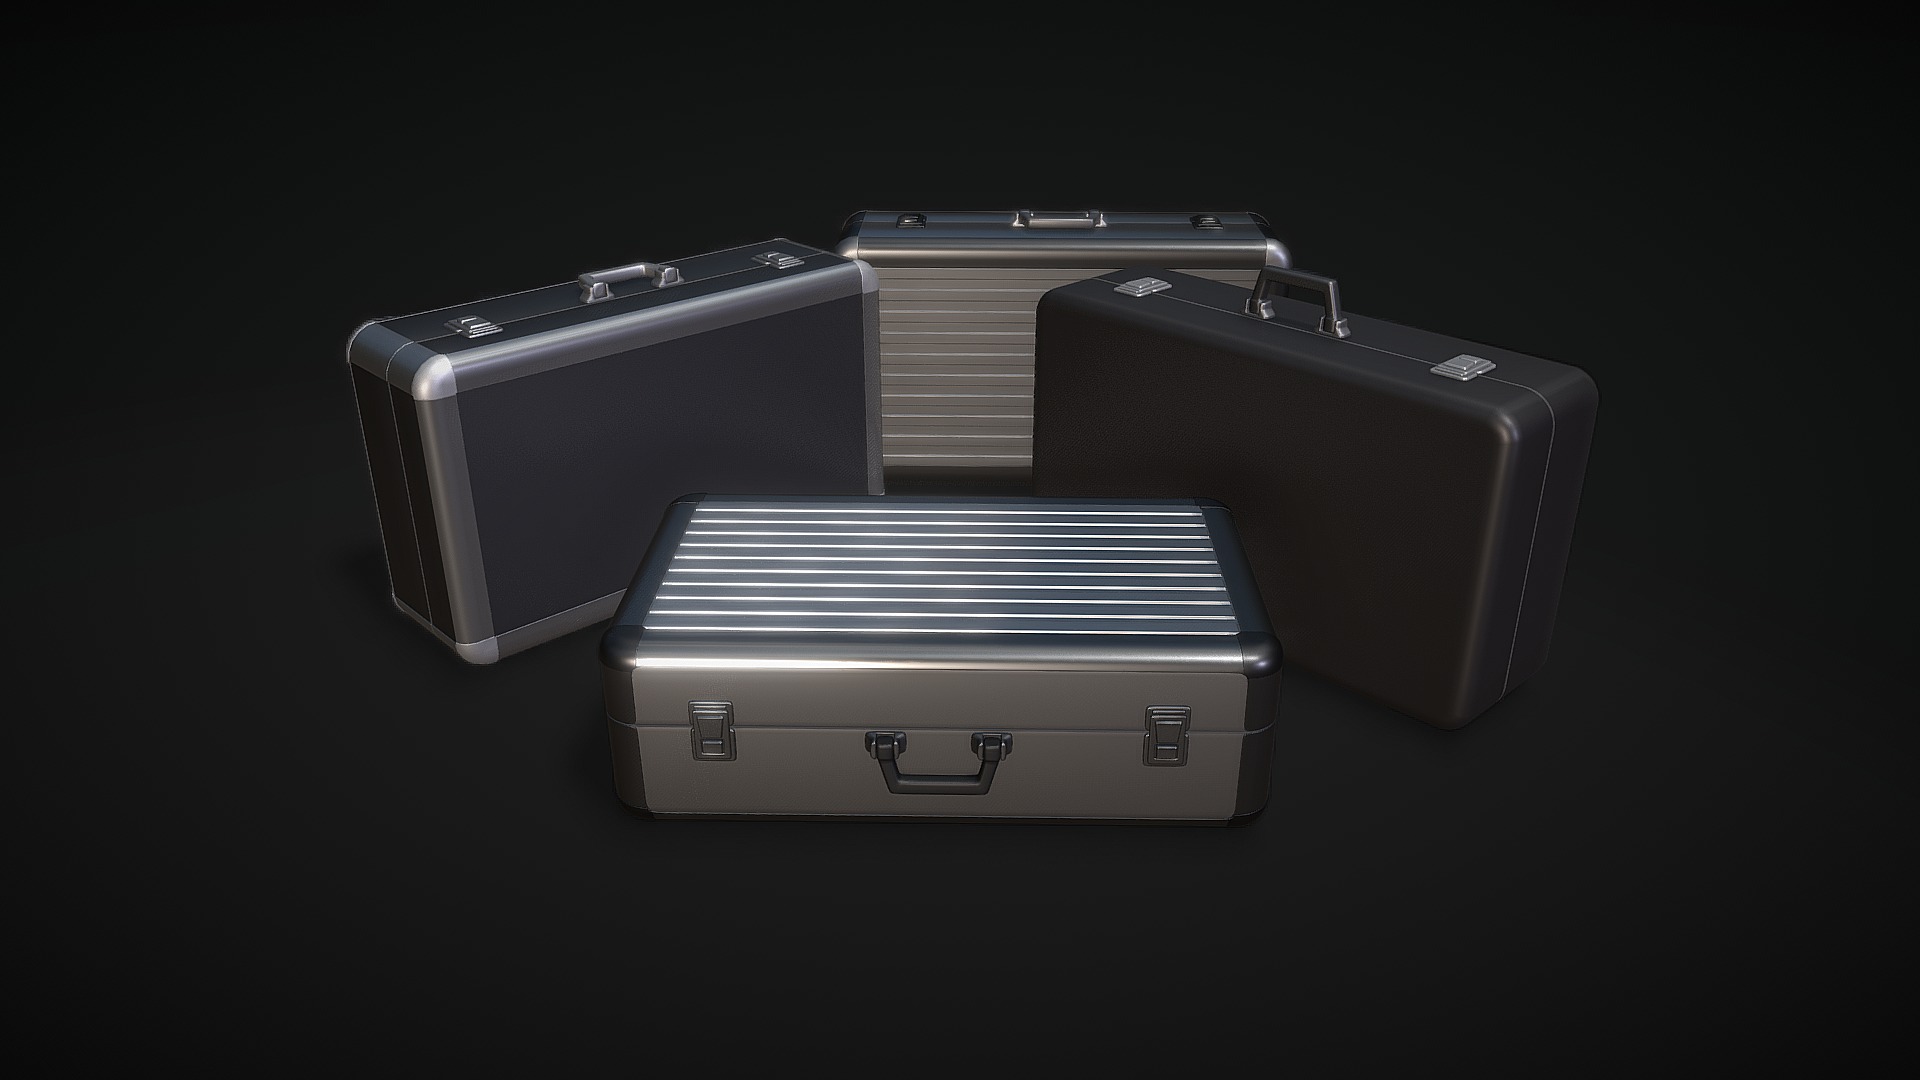 3D model Two Types of Metal ( Aluminum ) Briefcases - This is a 3D model of the Two Types of Metal ( Aluminum ) Briefcases. The 3D model is about a group of suitcases.